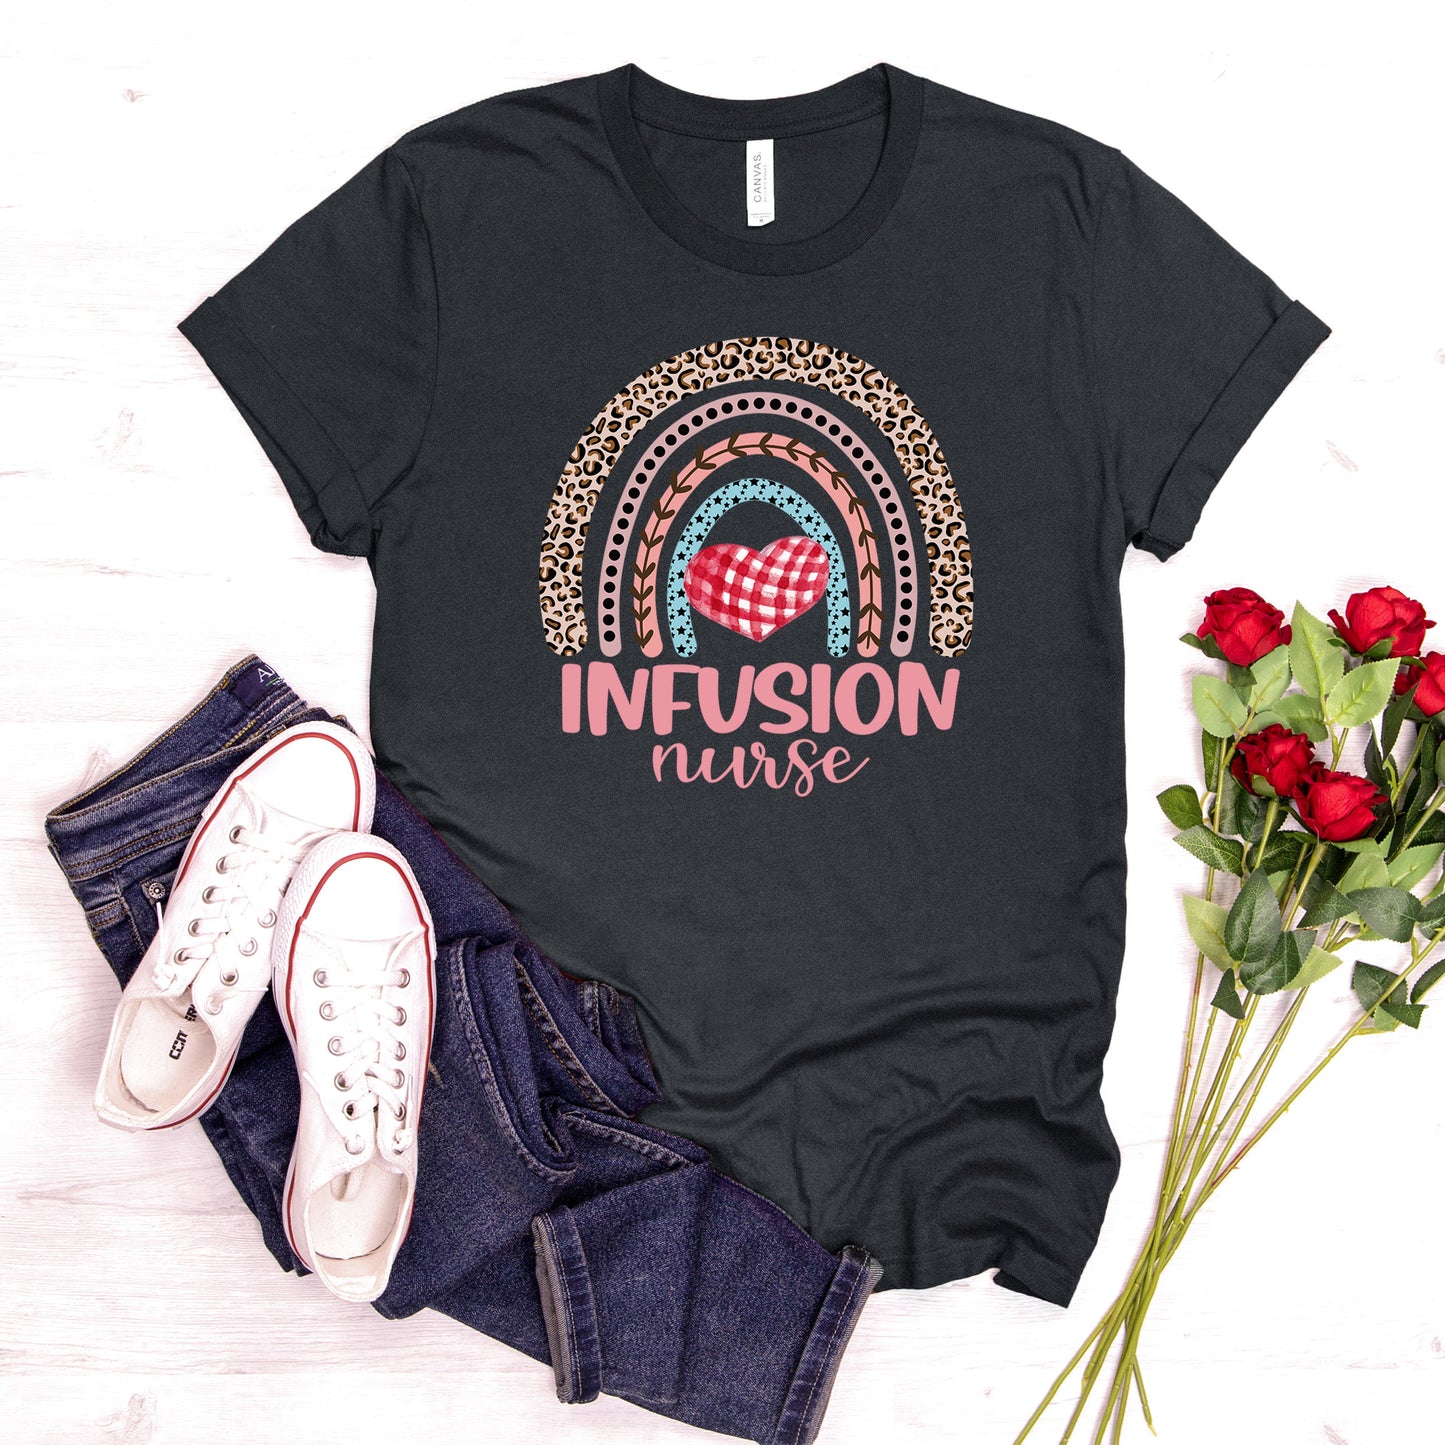 Infusion Nurse, Infusion Day Shirt, Infusion Therapy Chemotherapy Nursing School Grad Tee POTS Autoimmune Disease Infusion Gift Bday